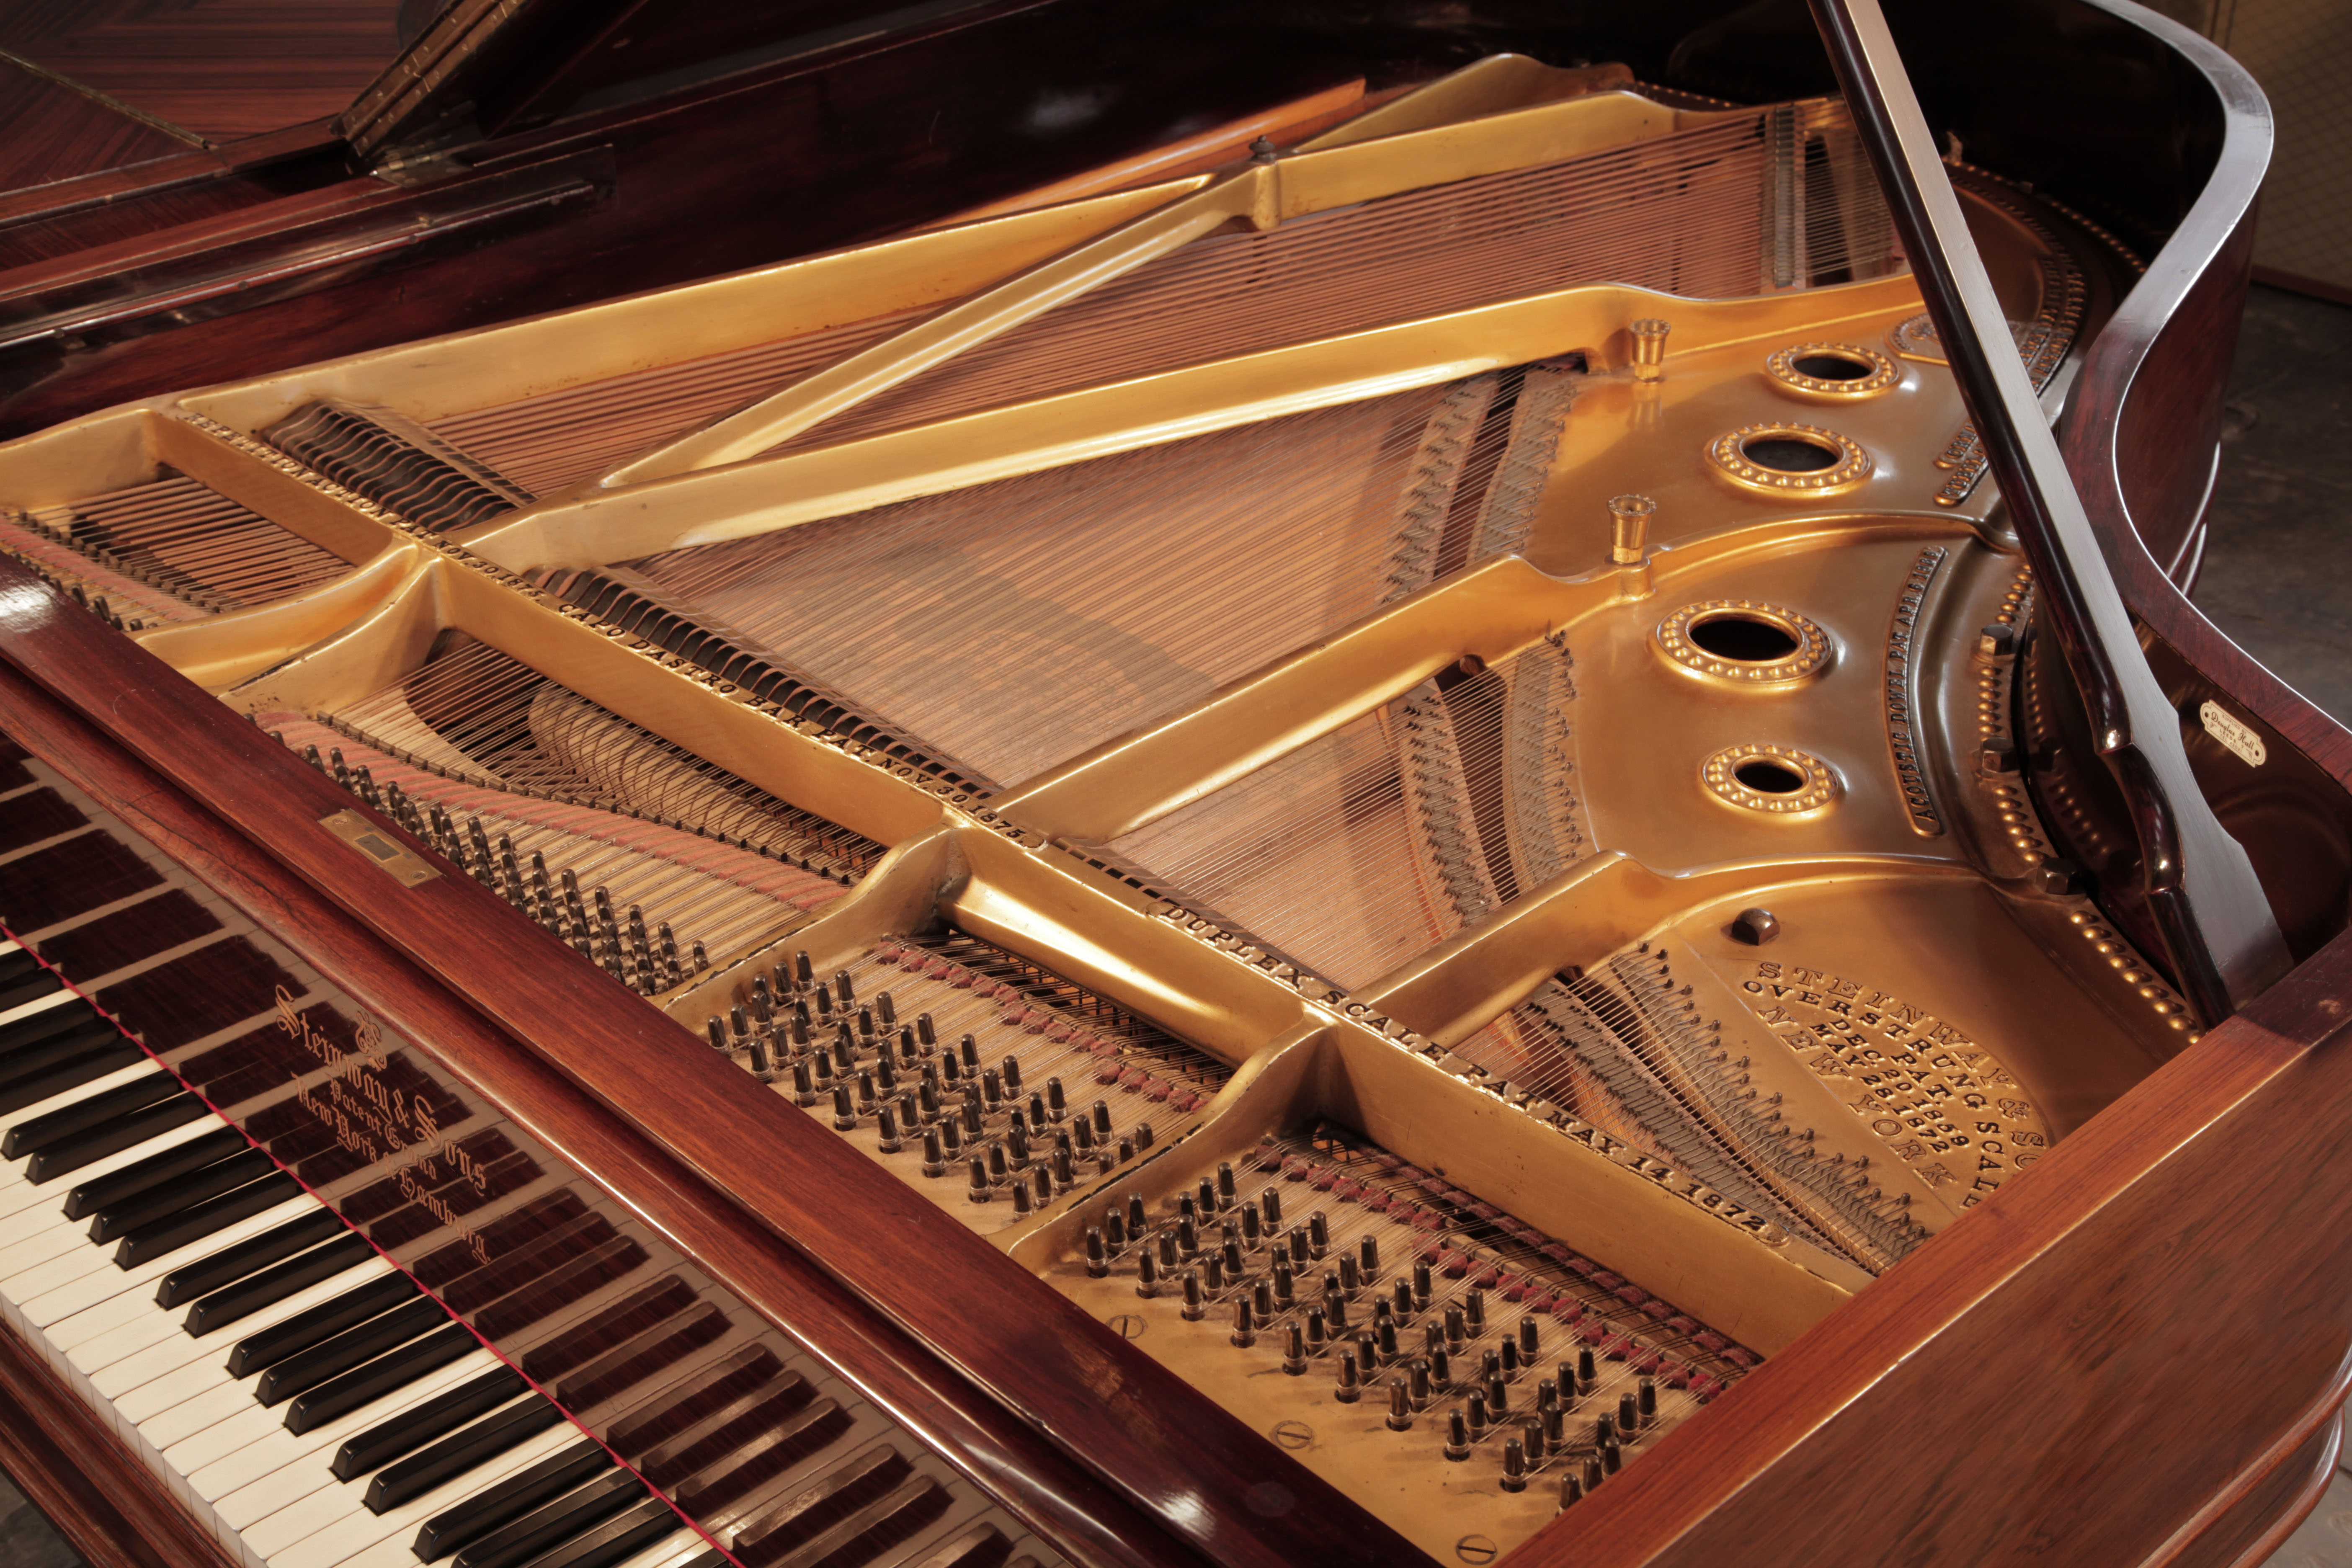 Steinway Model A   instrument. We are looking for Steinway pianos any age or condition.